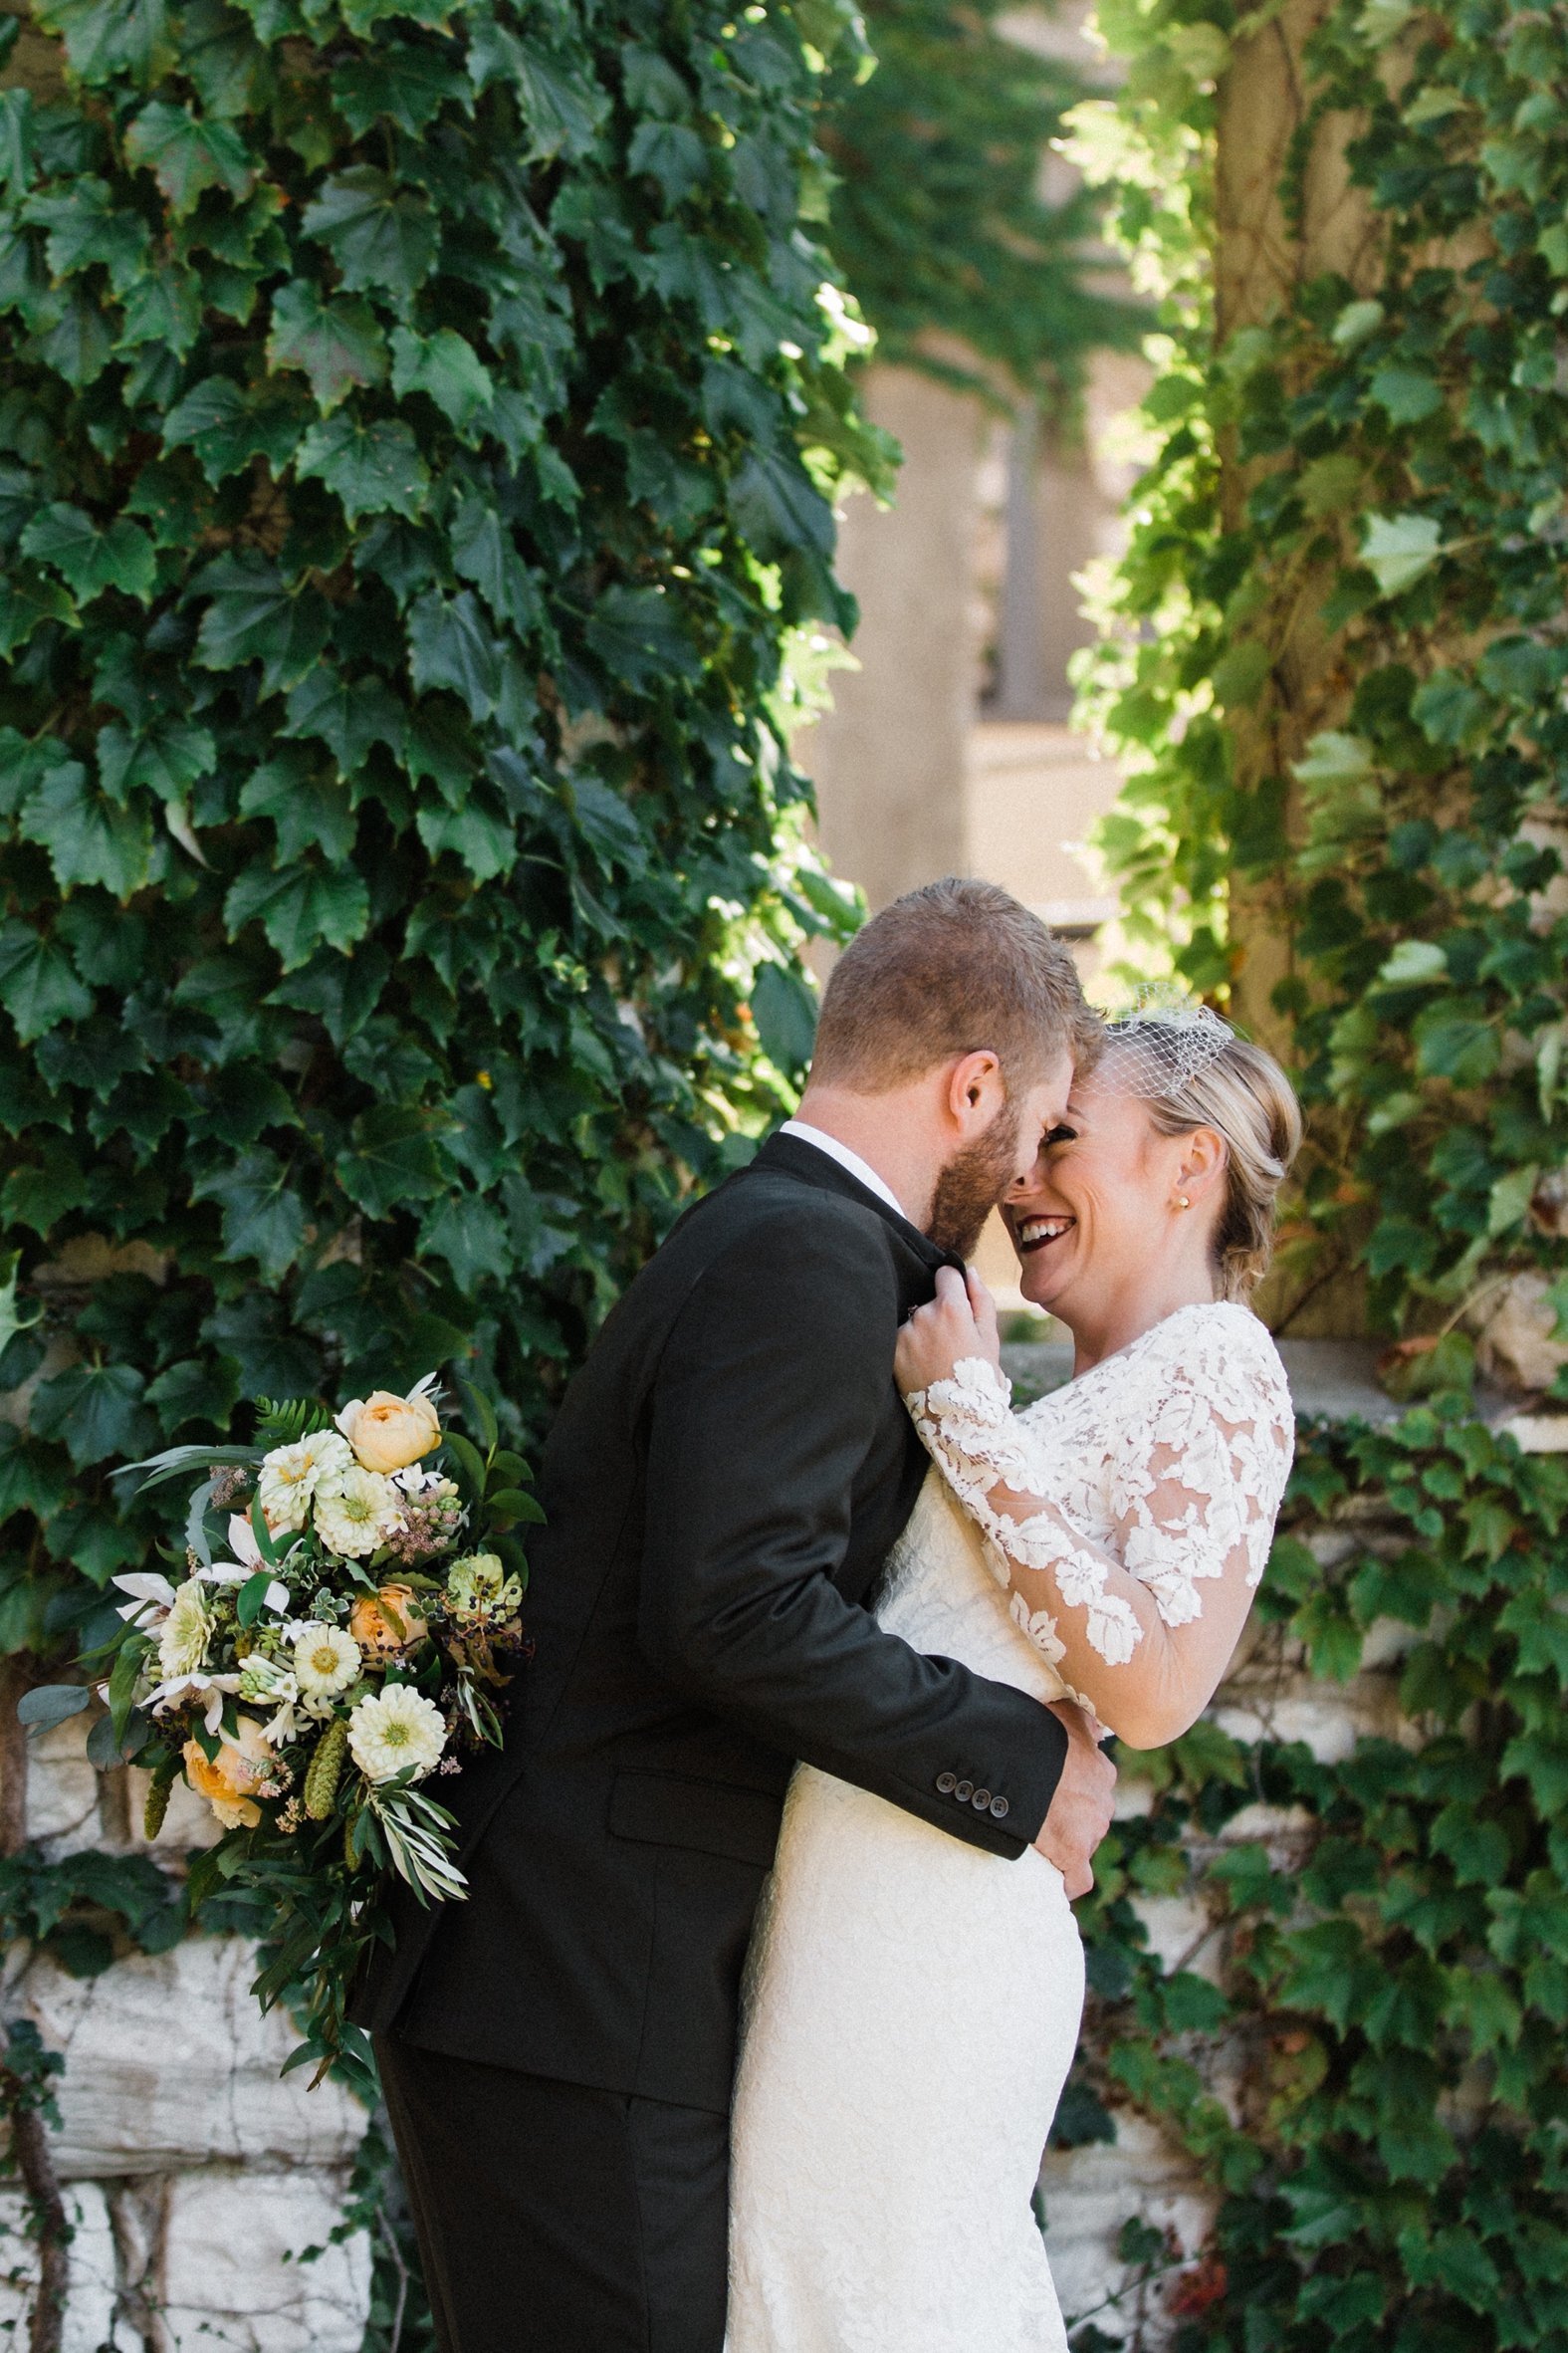 Bride and groom kissing in ivy covered archway. Bride in lace long sleeve backless dress and birdcage veil, groom in olive green suit. Peach and ivory bridal bouquet.